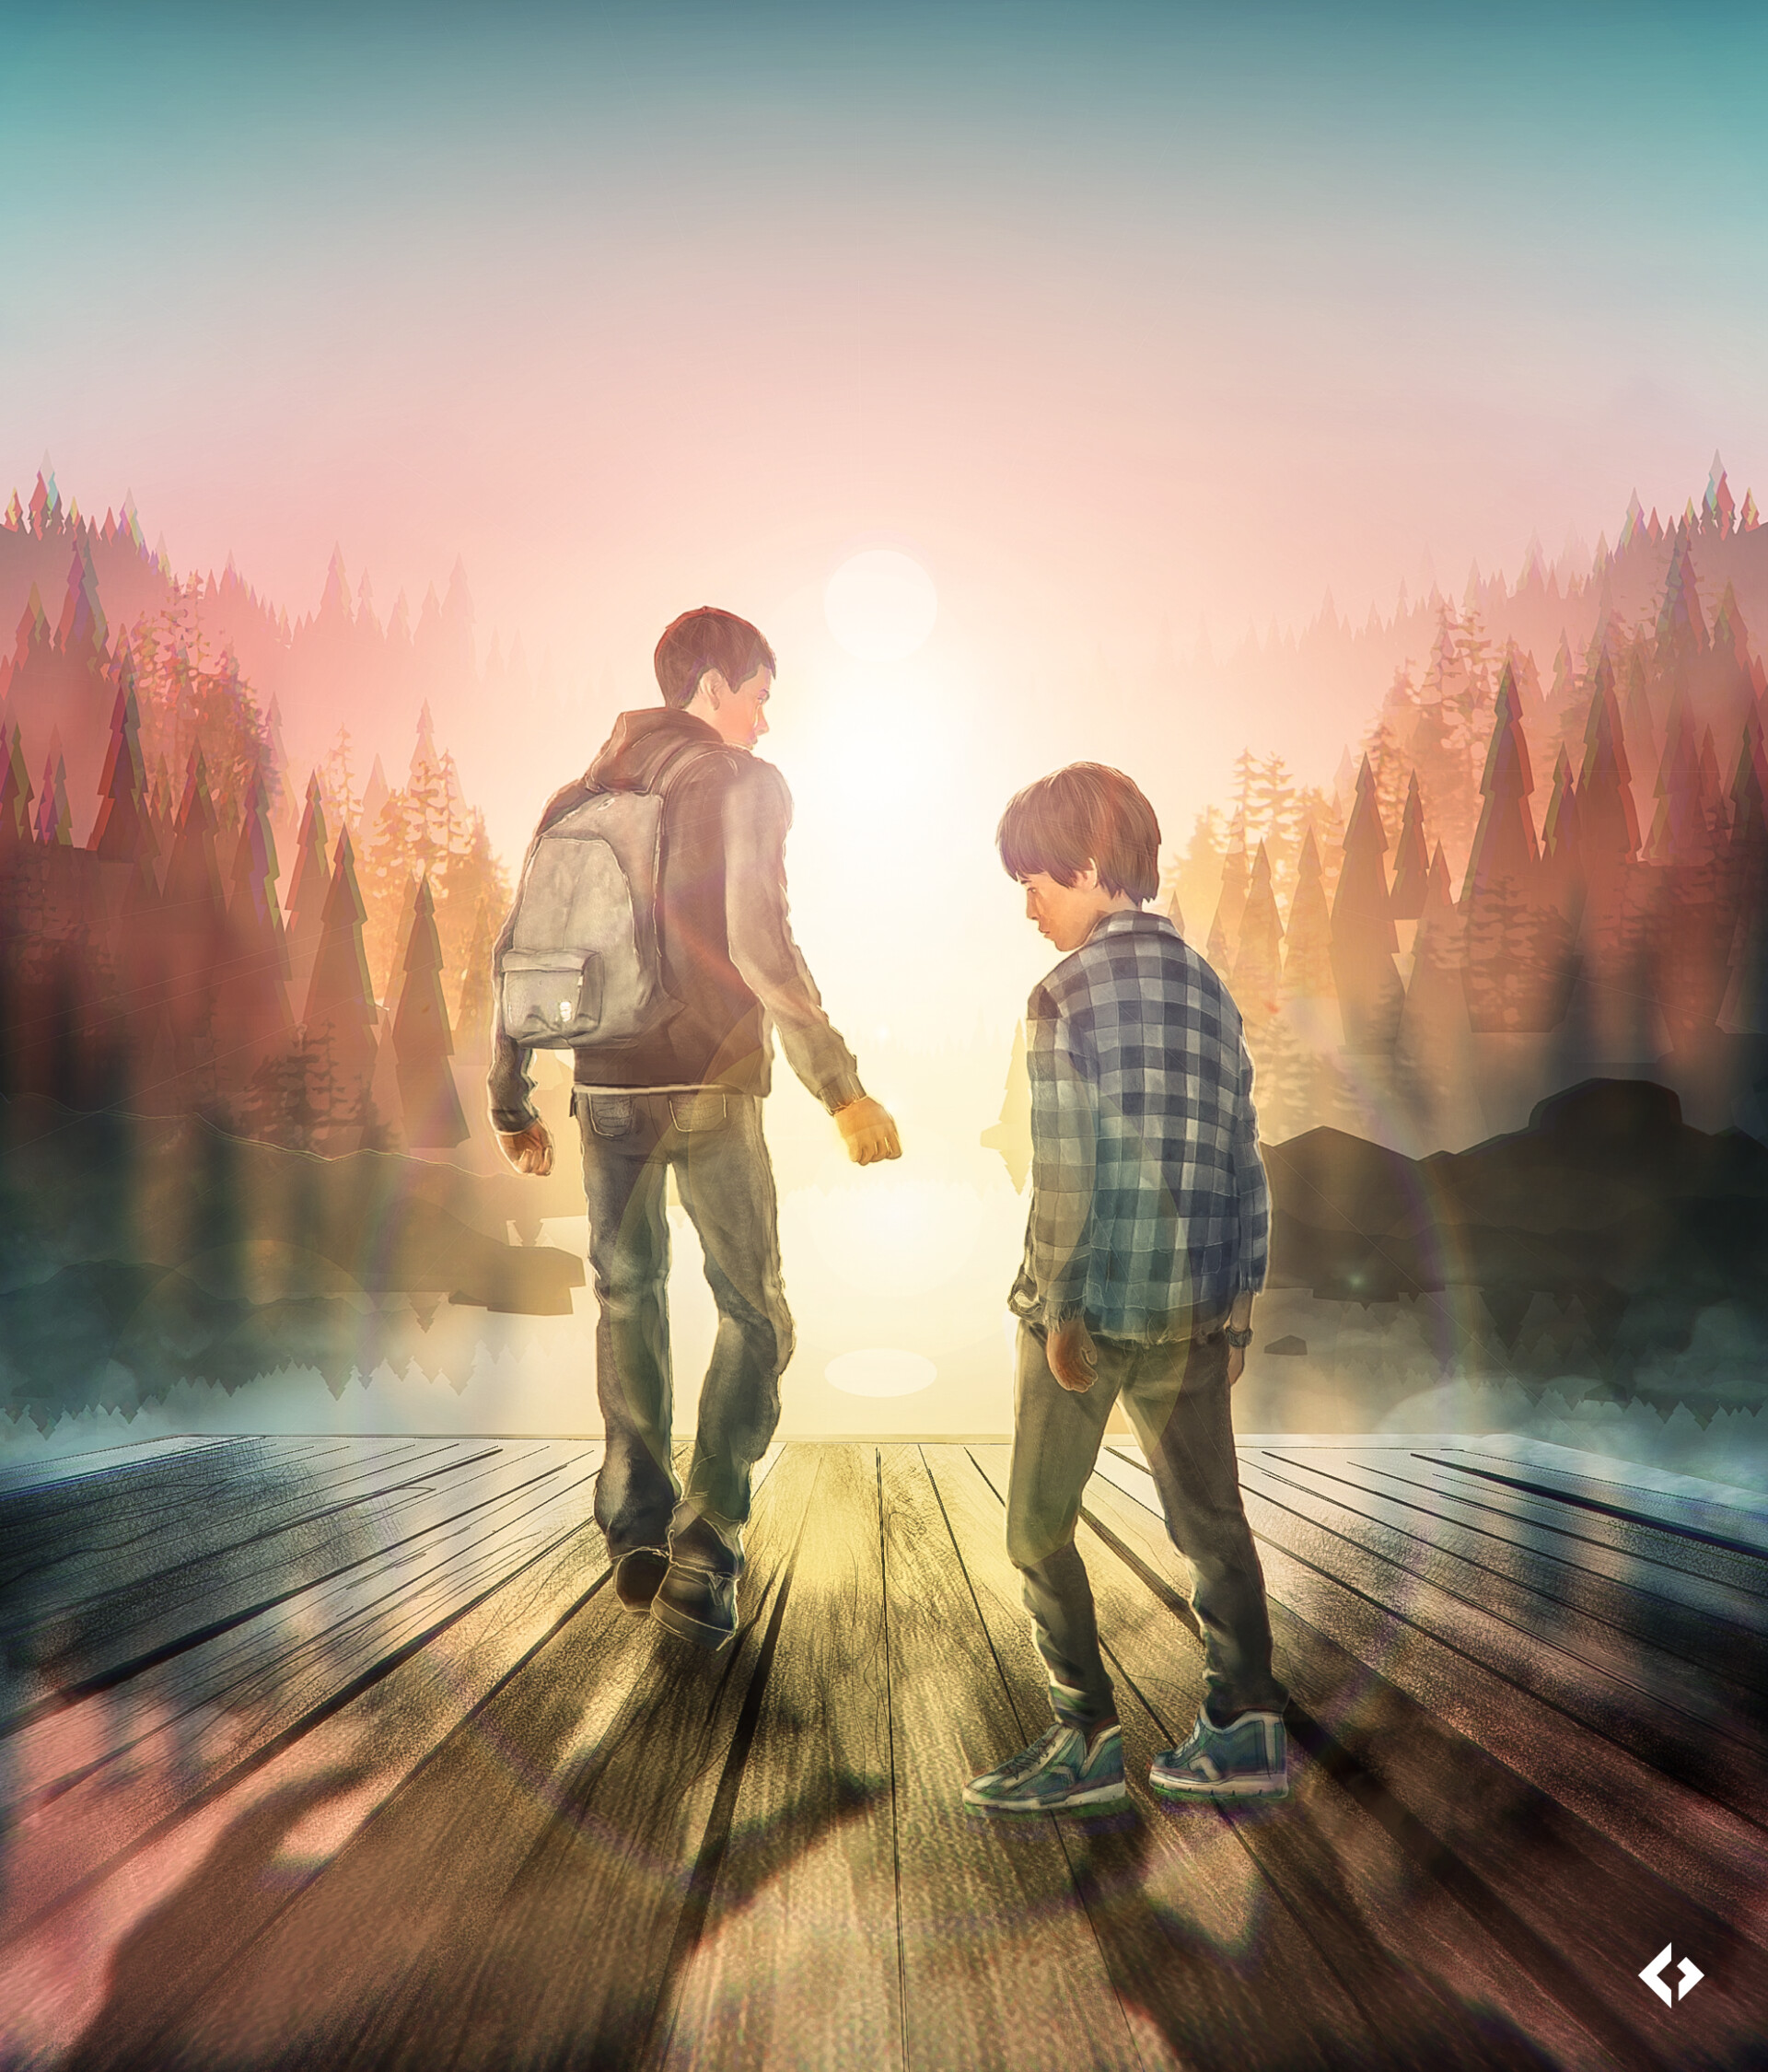 Life s not being lived. Life is Strange 2. Life is Strange 2 Постер. Life is Strange 2 обложка. Life is Strange 2 дорога.